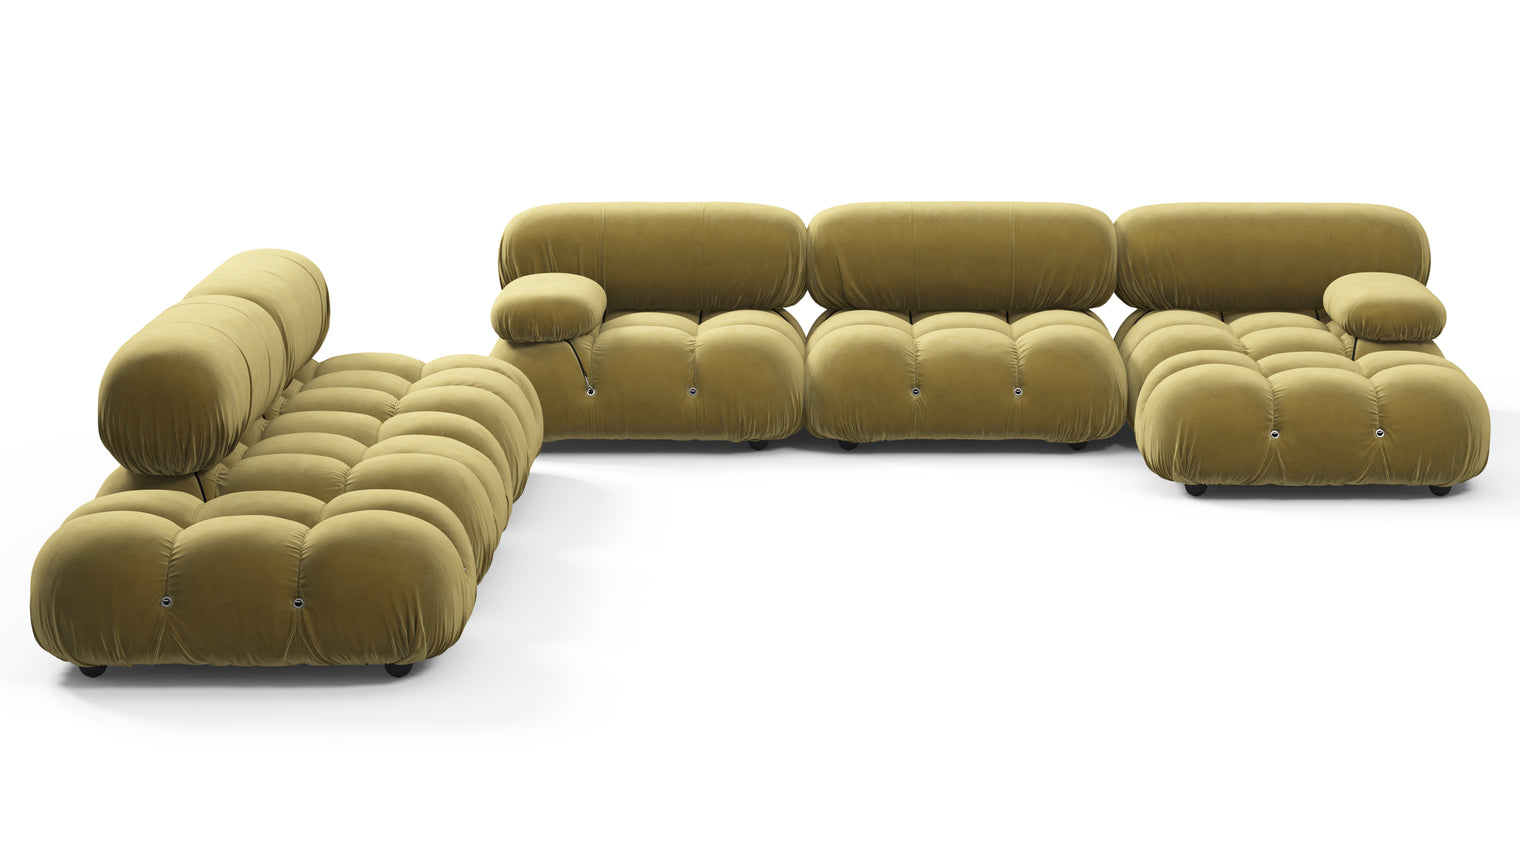 STYLISH SECTIONAL | With the Belia’s sectional design, you can create a sofa that suits your space. The soft curves of each carefully crafted cushion create a luxurious and comfortable seat for the ultimate in stylish comfort.
